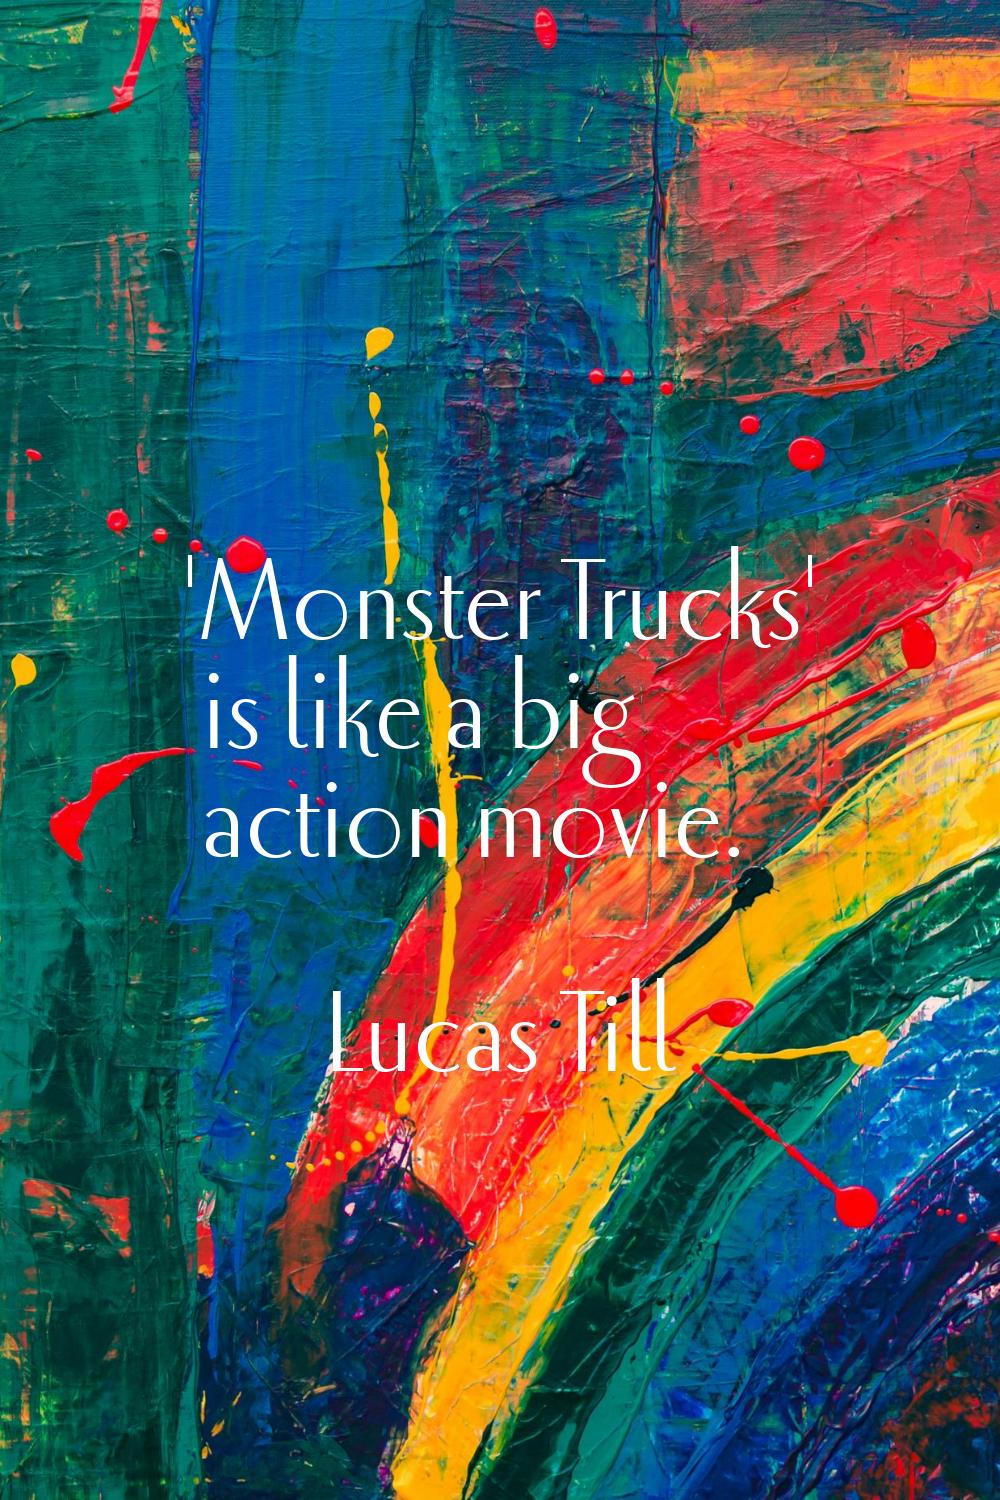 'Monster Trucks' is like a big action movie.